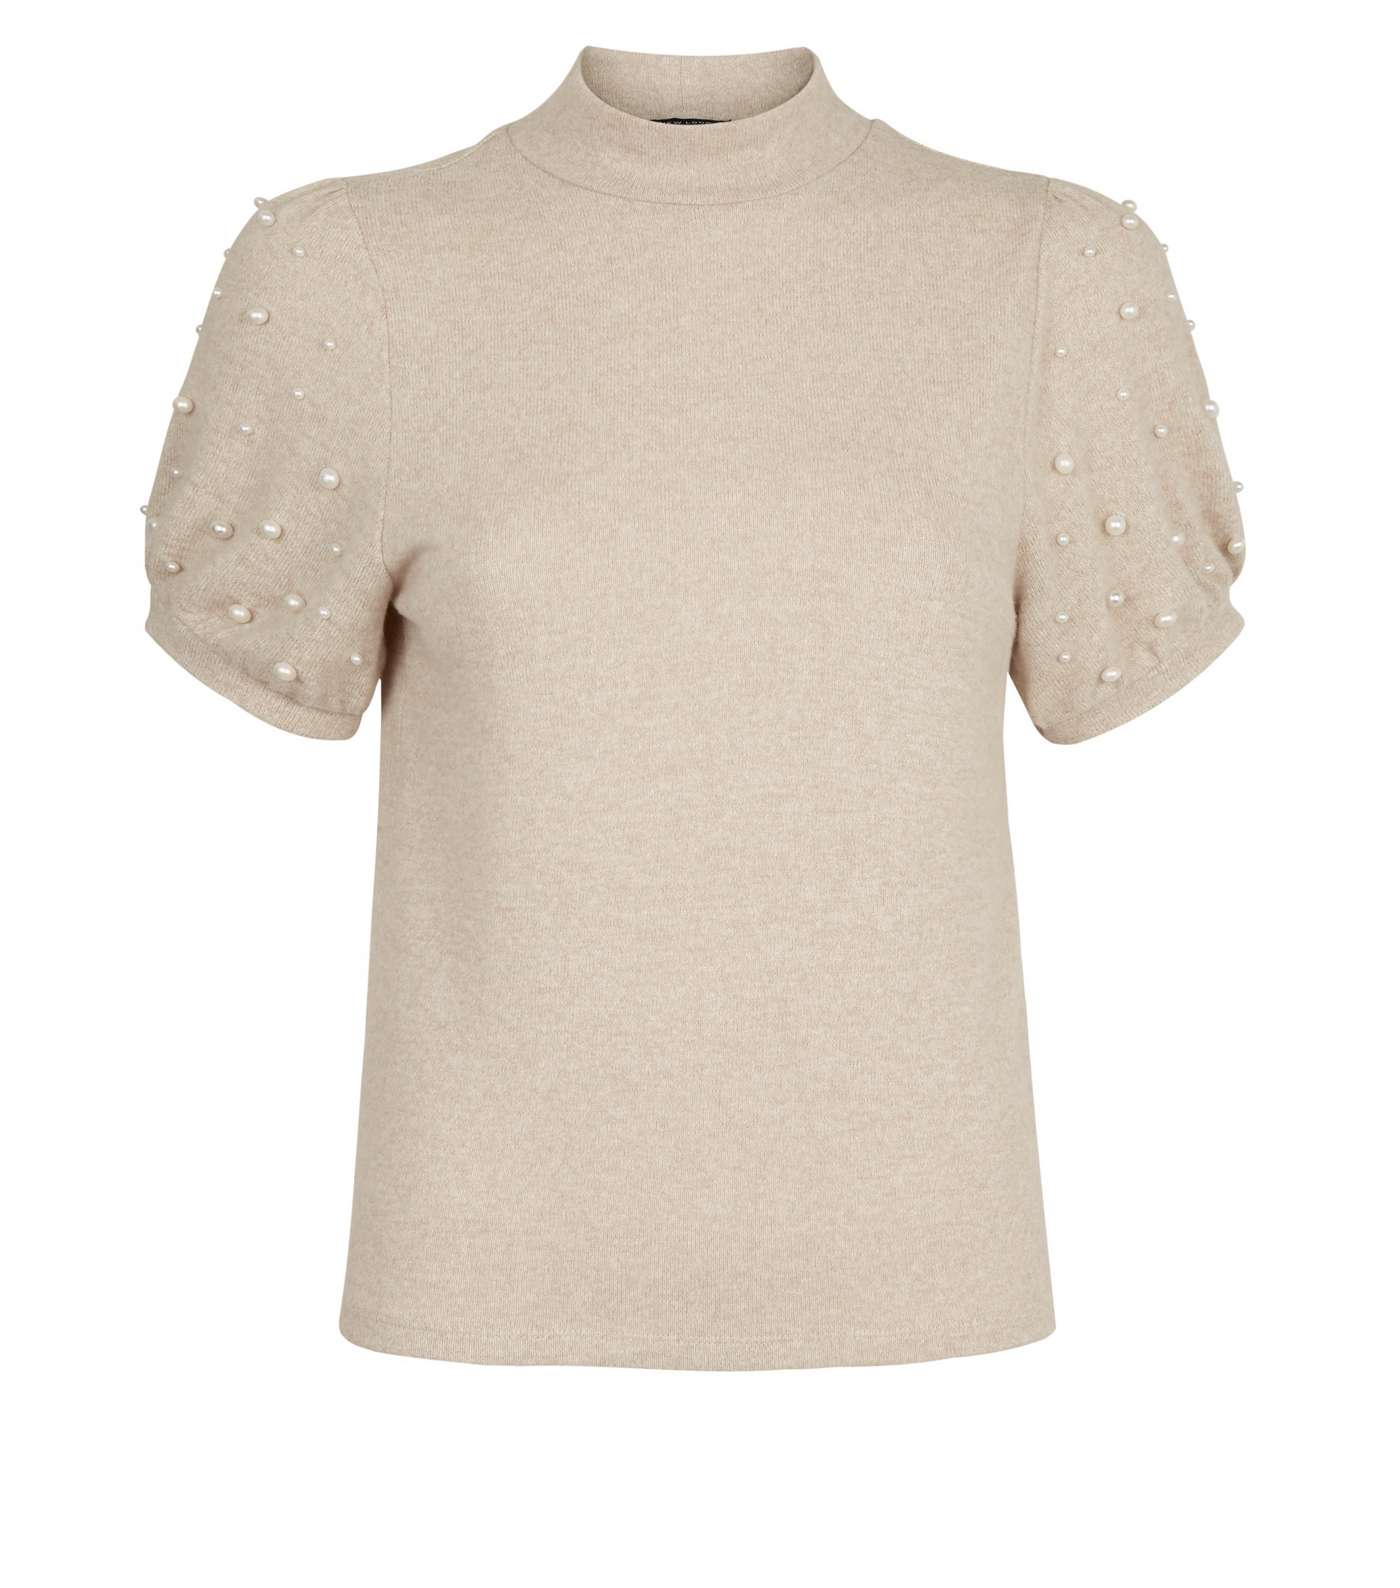 Cream Faux Pearl High Neck T-Shirt Image 4